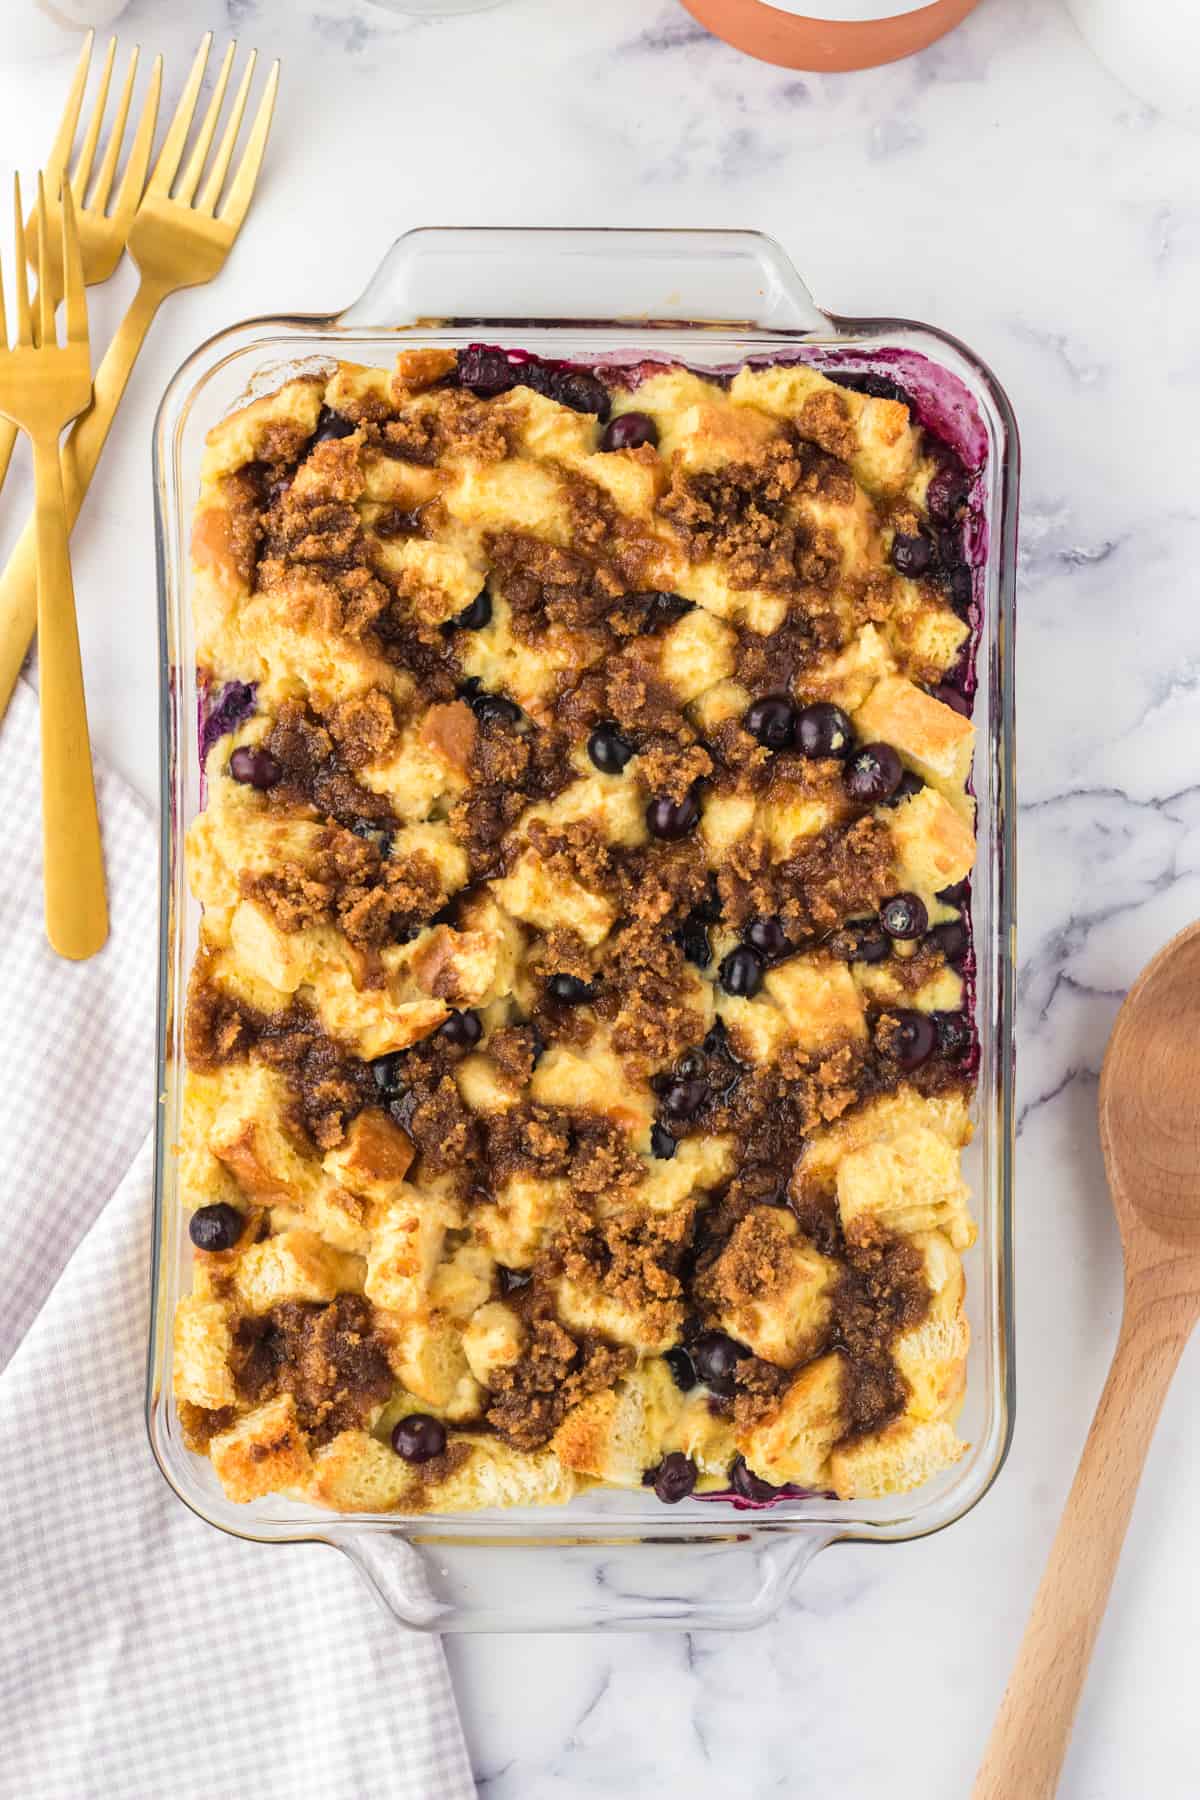 Golden brown blueberry french toast casserole in baking dish with serving spoon and forks next to it.